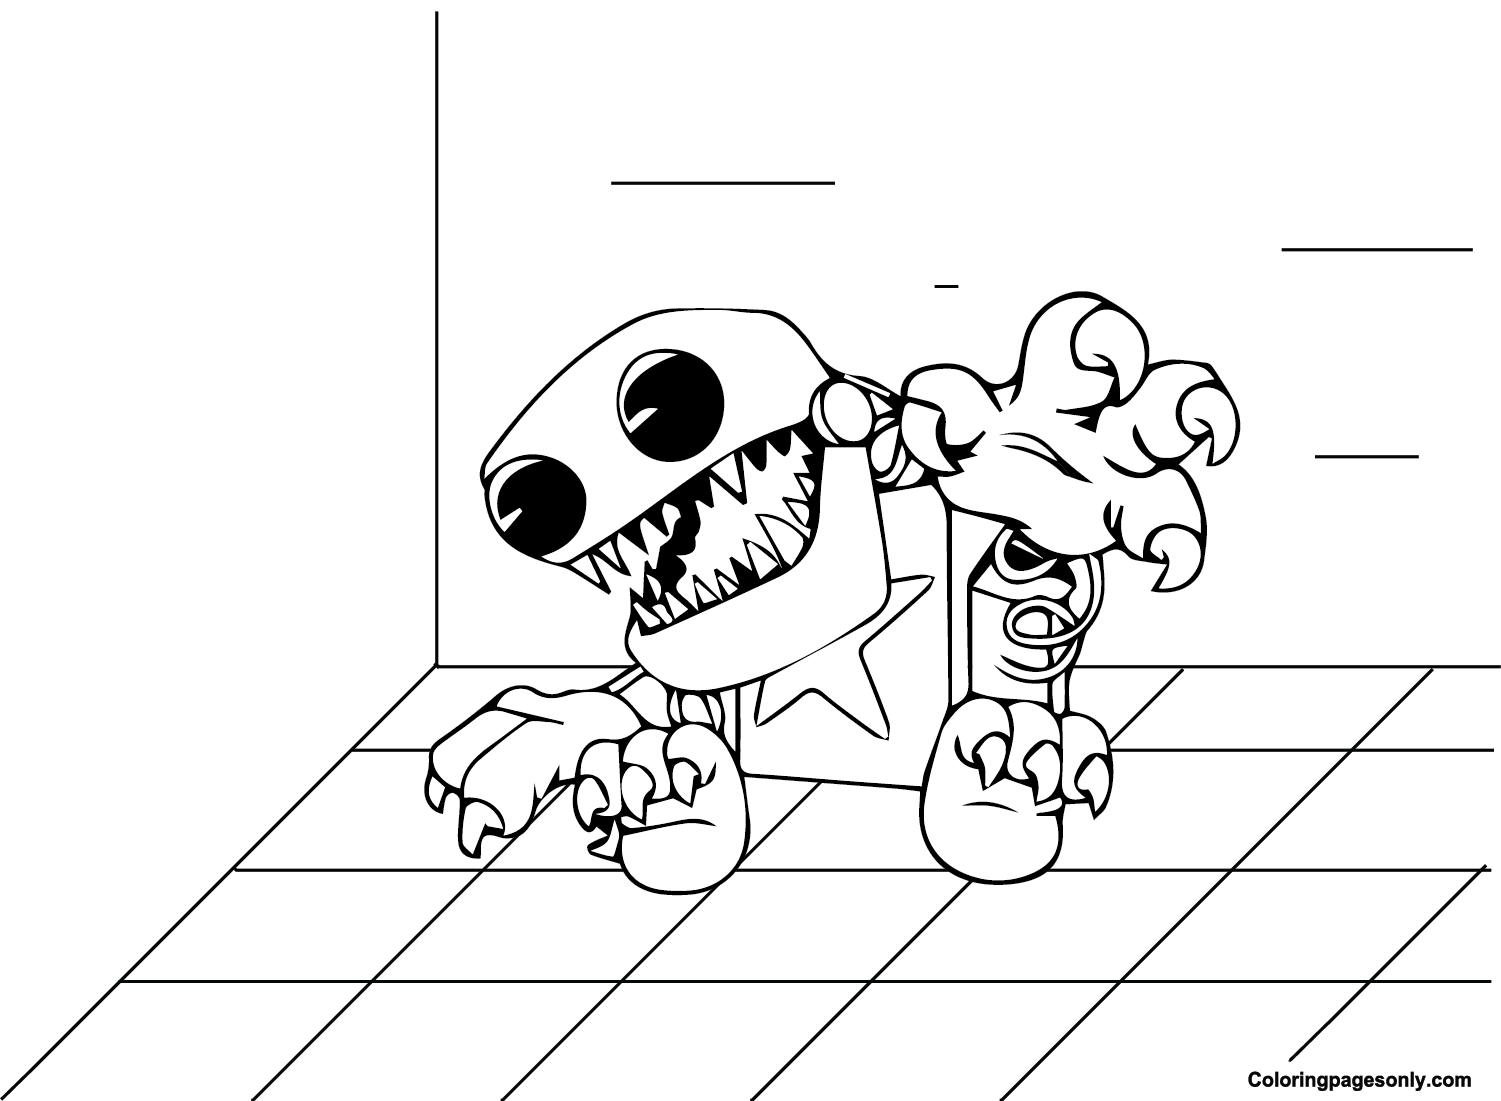 Boxy Boo Download Coloring Page